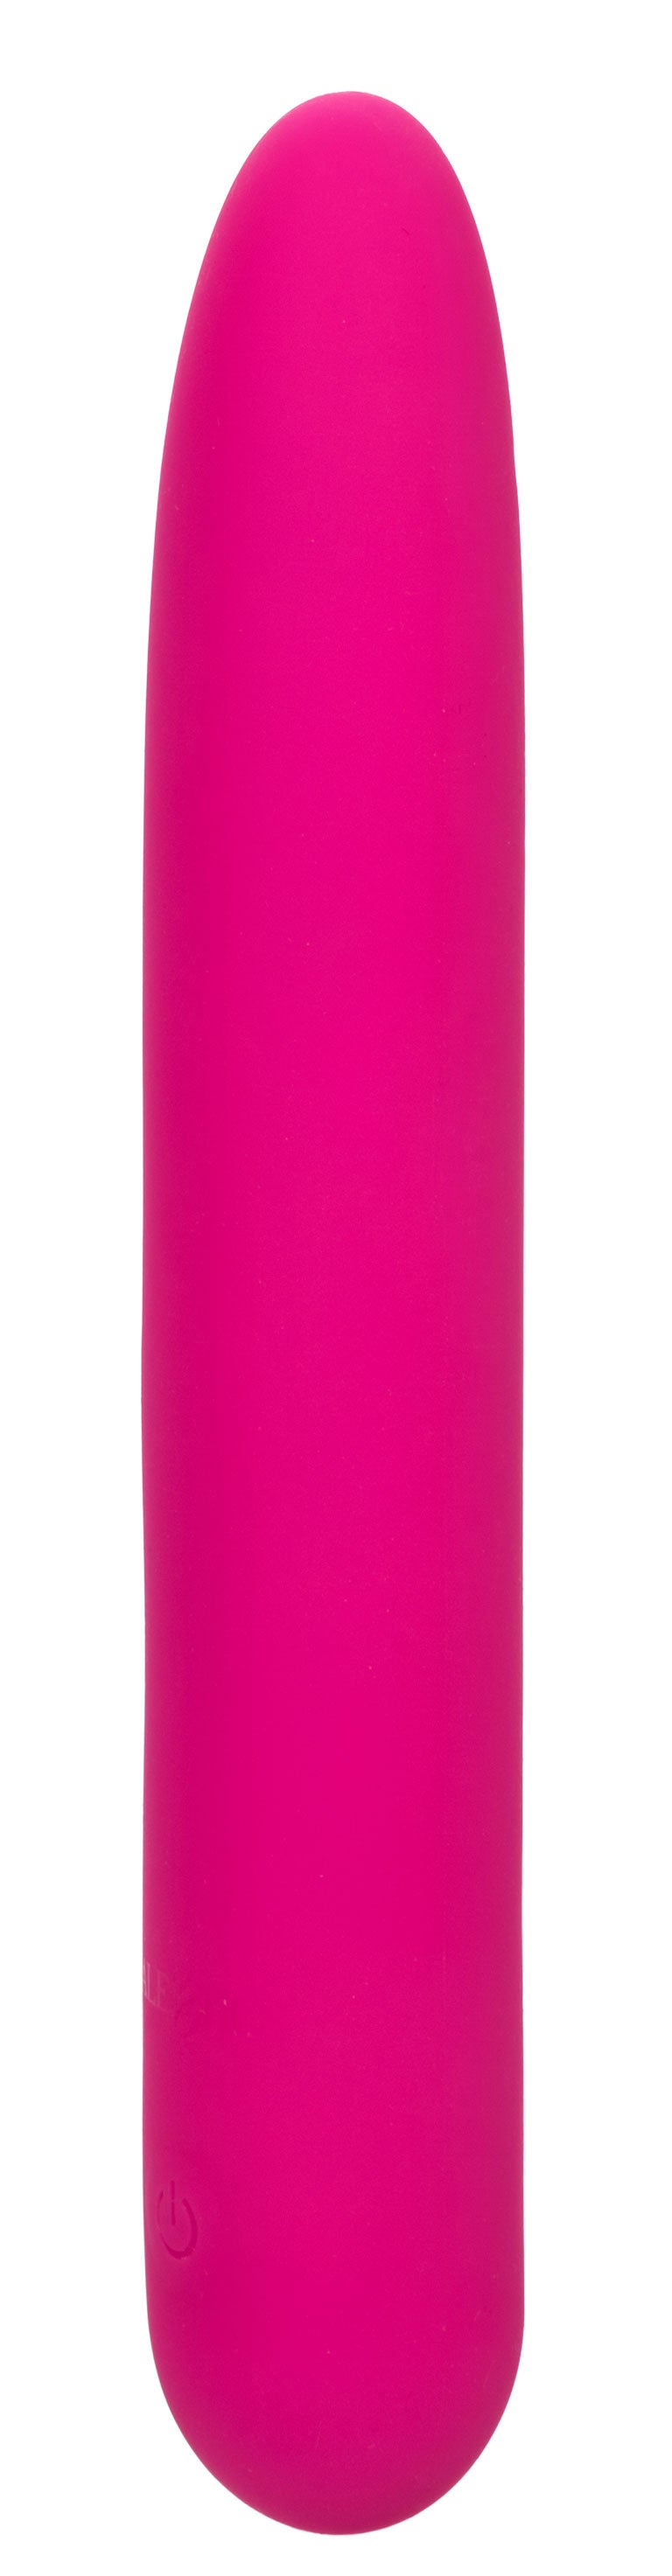 Bliss Liquid Silicone Vibe - Pink SE0570053